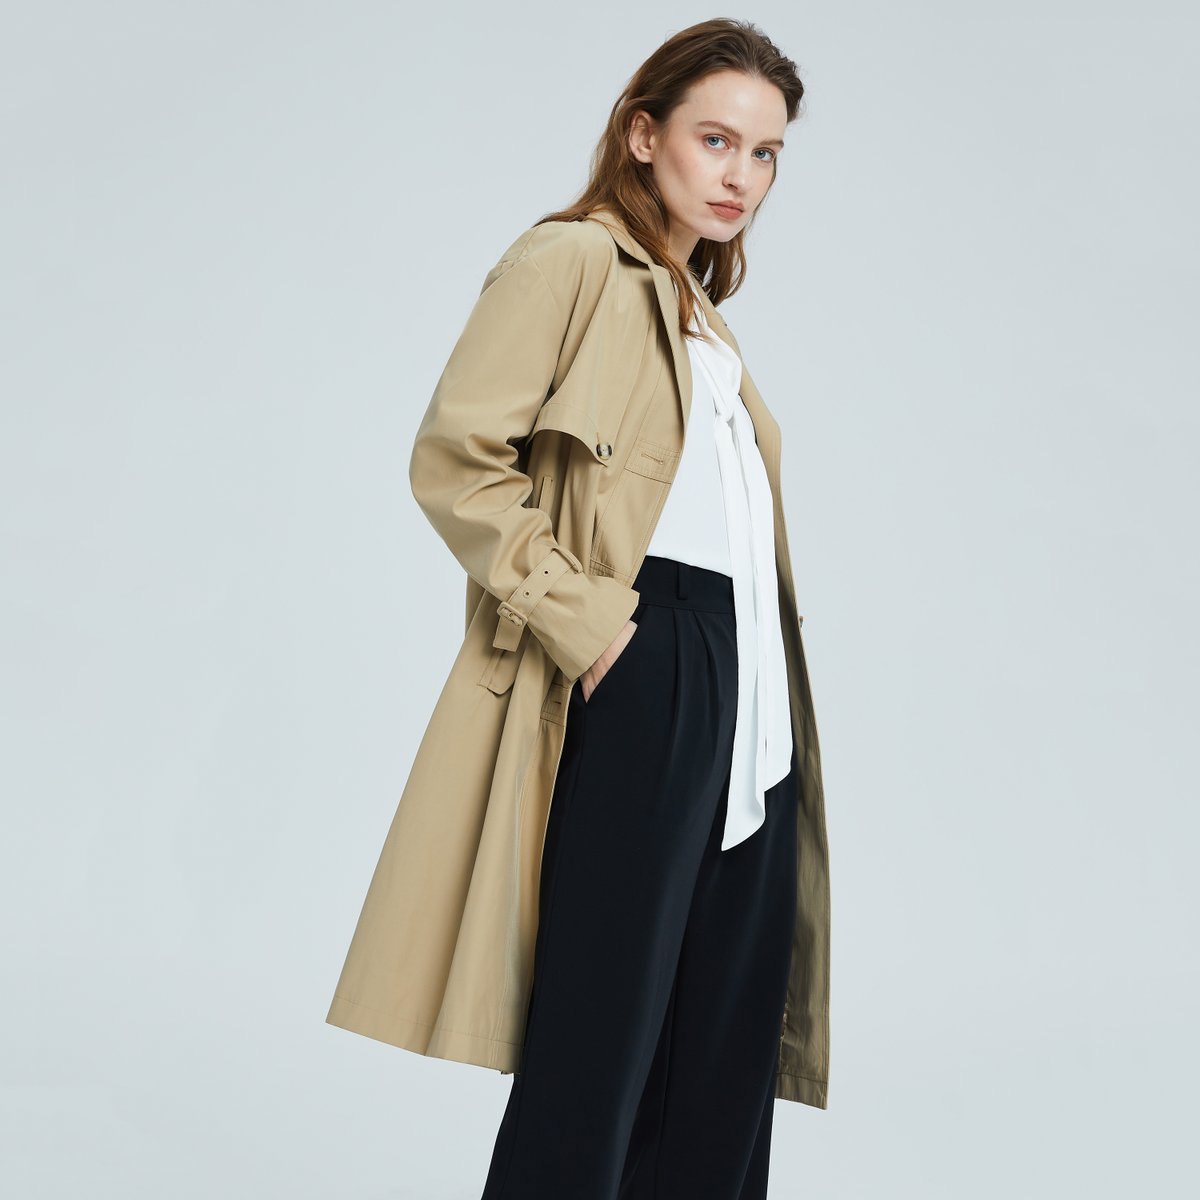 Notched lapels; a belt to adjust the fit; cuffs with adjustable buckles — make trench coats versatile, practical, and stylish.

#orolay #orolayofficial #newarrivals #springlooks #springoutfitideas #trenchcoat #whattowear #outfitinspiration #wardrobestaple #minimalstyle